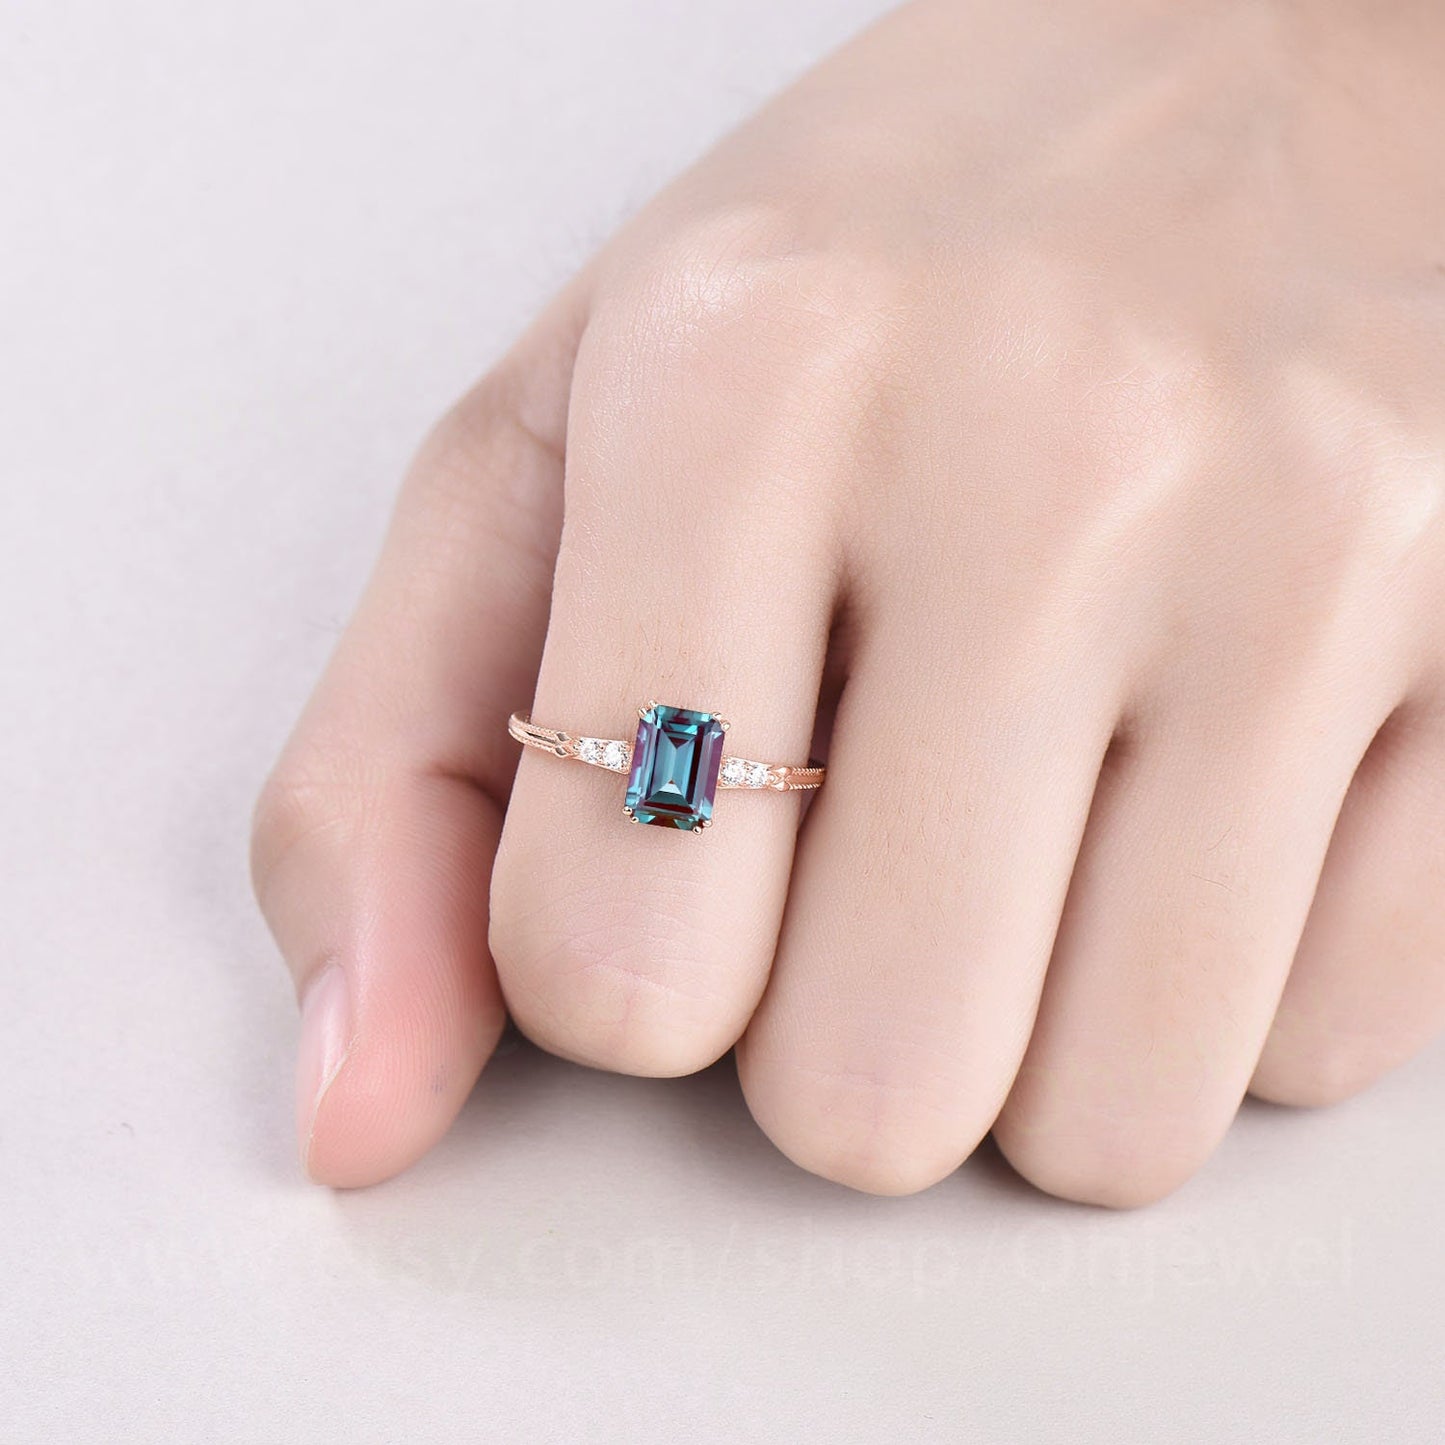 Vintage emerald cut Alexandrite engagement ring 14k rose gold Alexandrite ring for women five stone diamond ring unique bridal ring jewelry